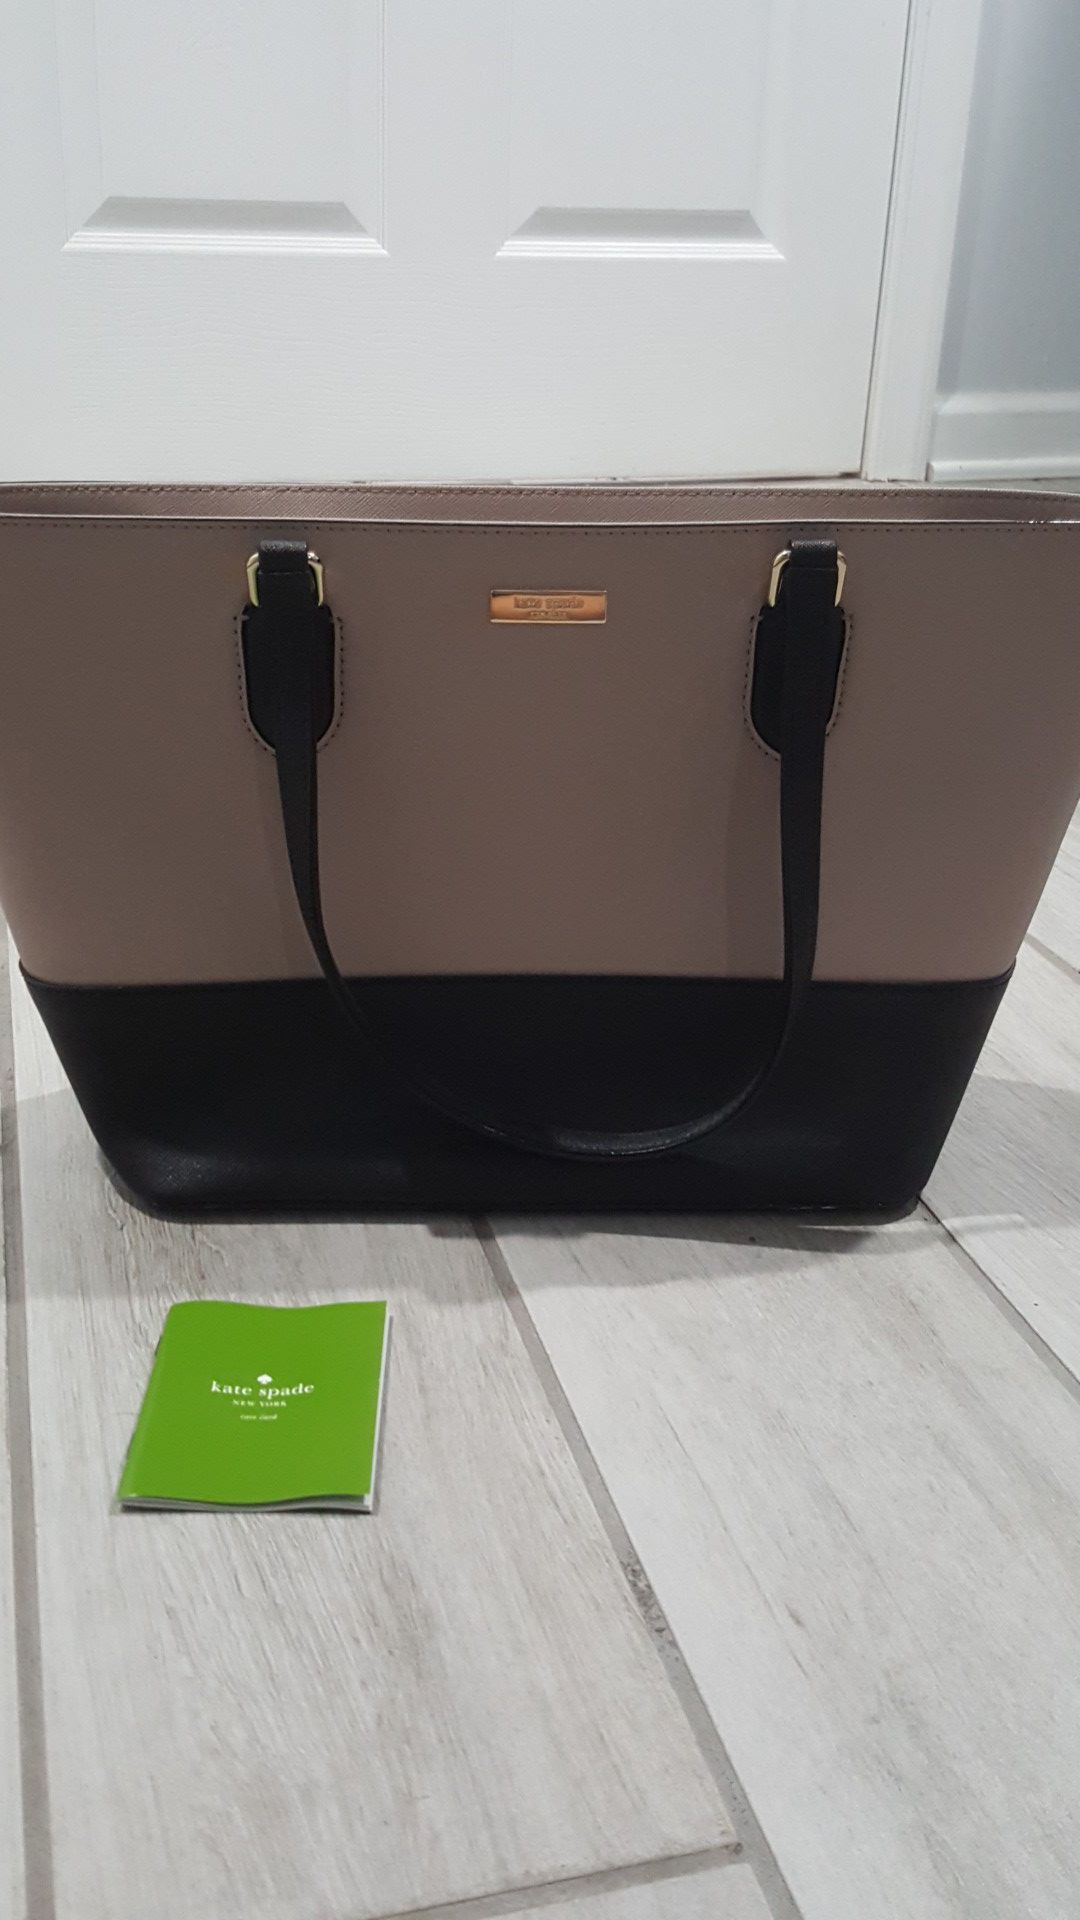 NEW Kate spade authentic tote - tan & black